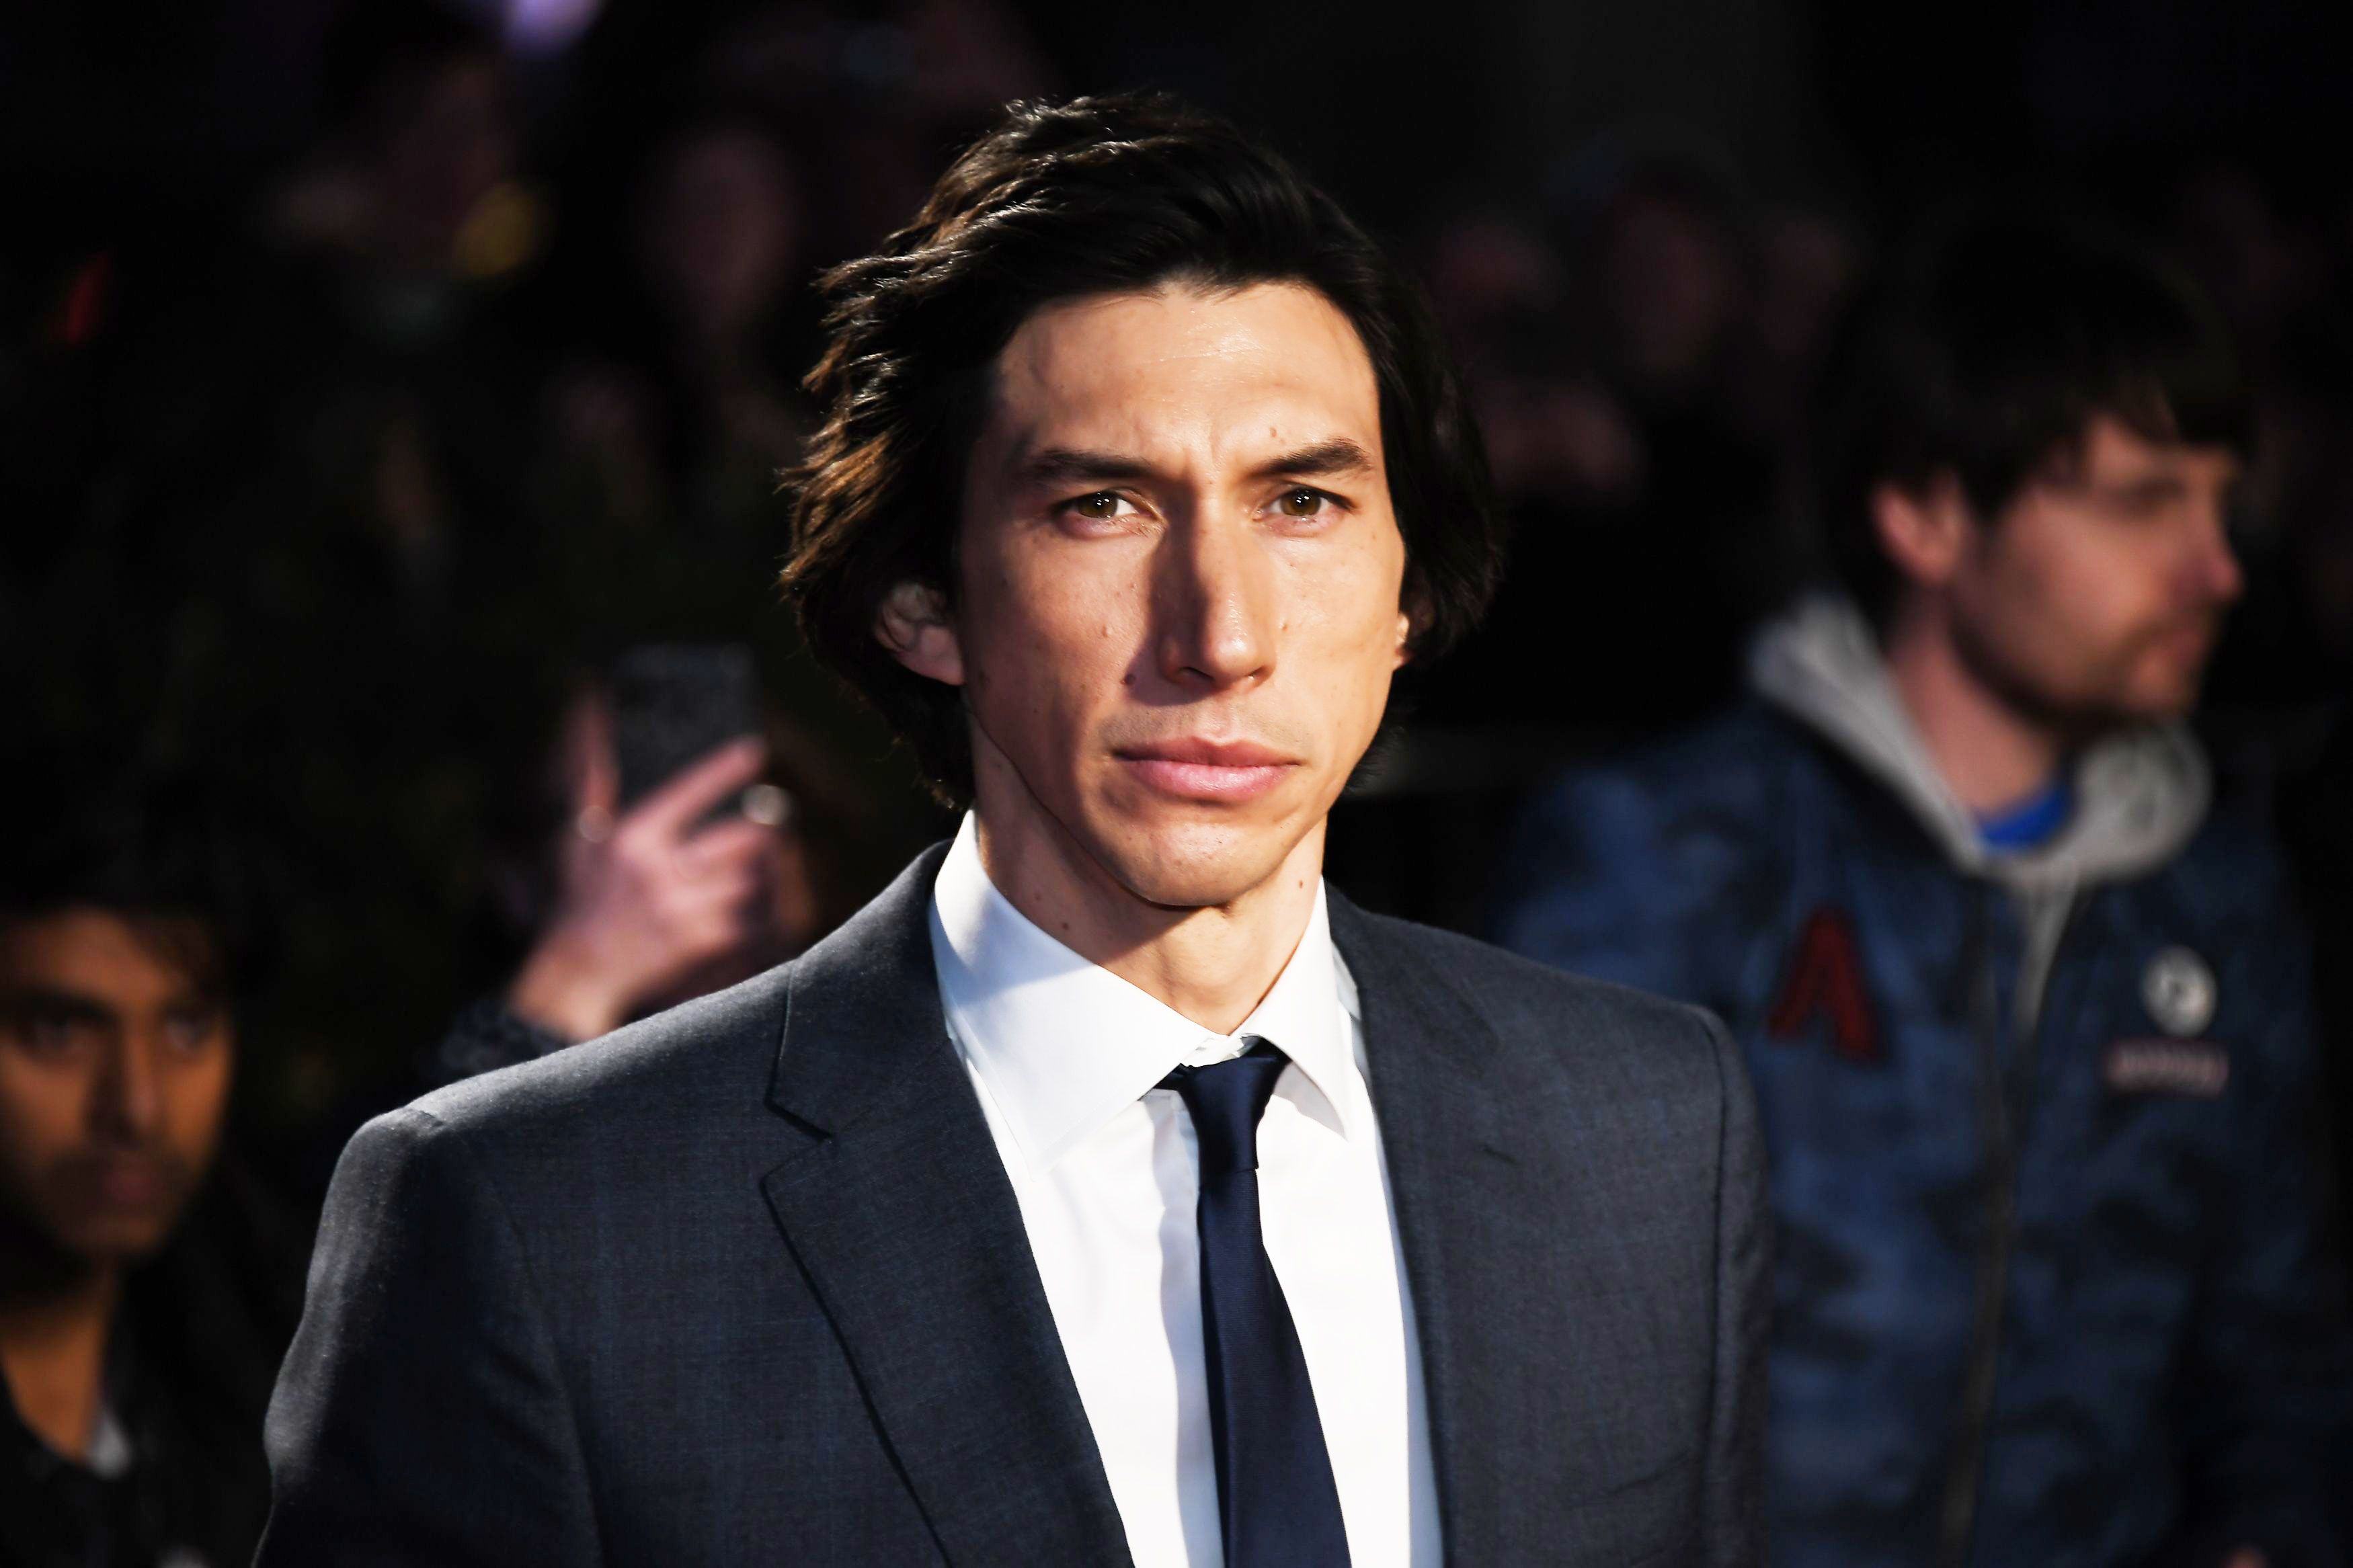 https://hips.hearstapps.com/hmg-prod/images/mh-adam-driver-attends-the-marriage-story-uk-premiere-during-news-photo-1571672443.jpg